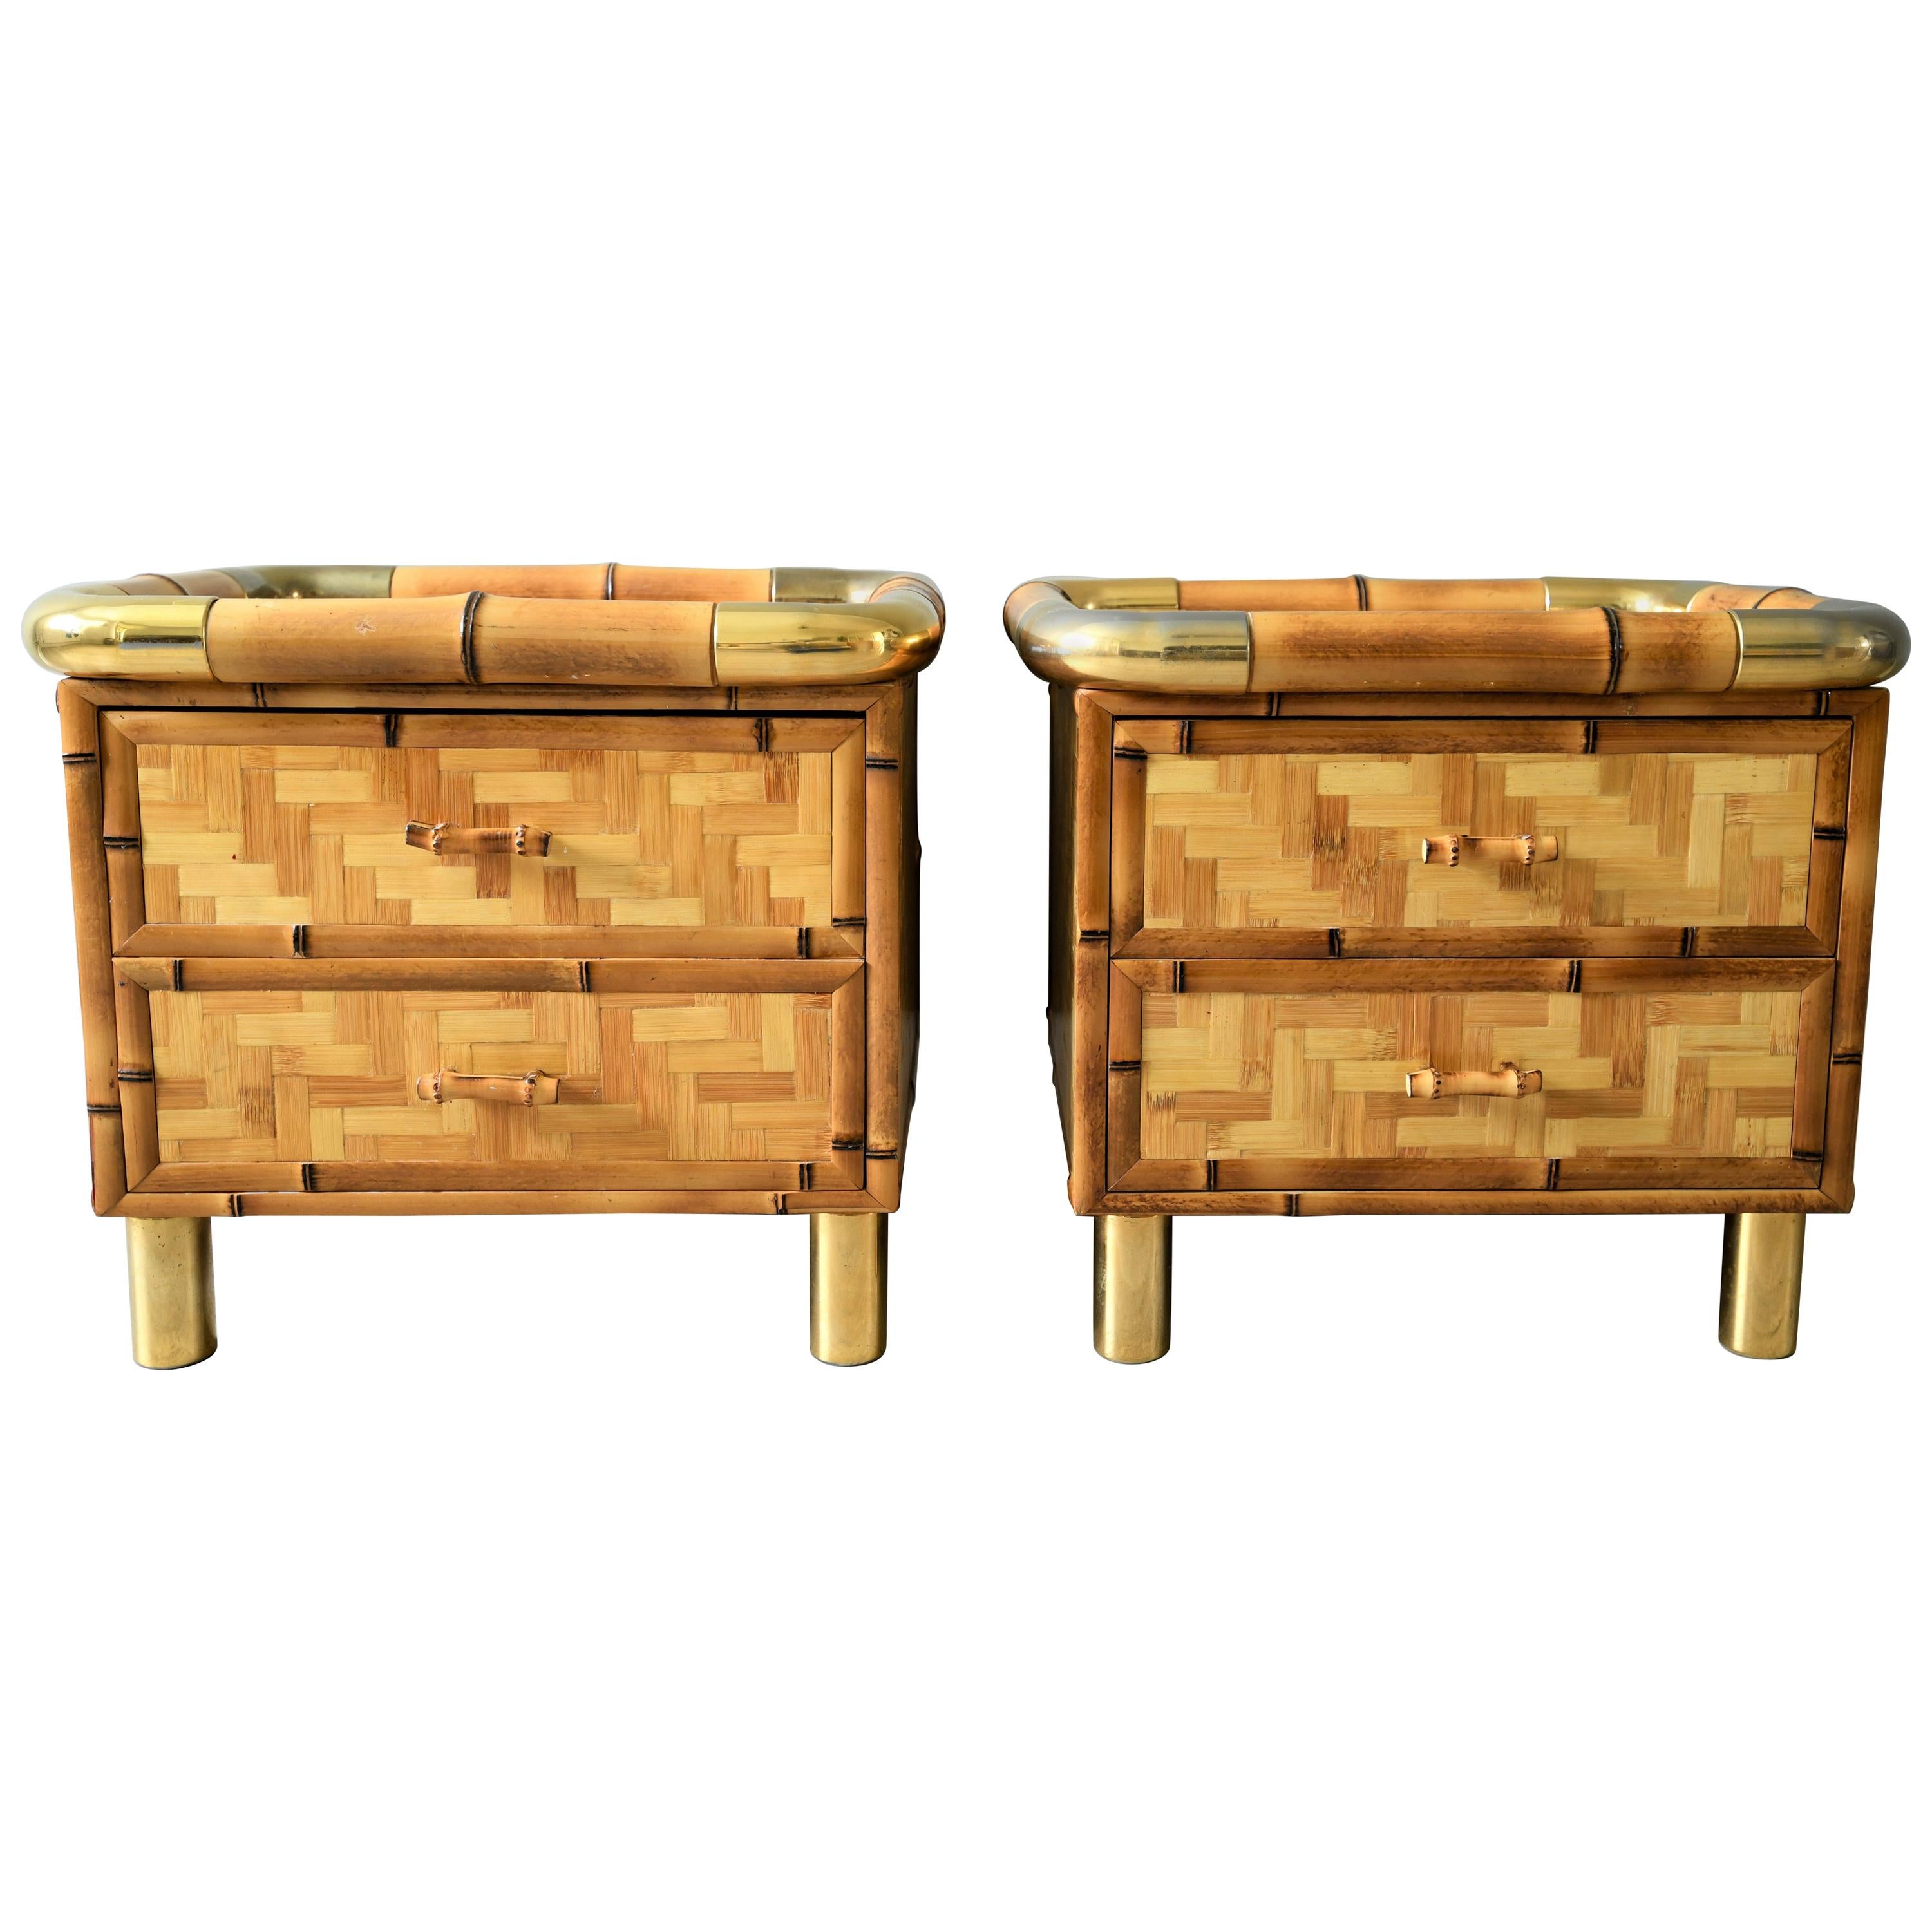 Rare Bamboo Parquetry Italian Bedroom Set Vanity and Pair of Nightstands, 1970s